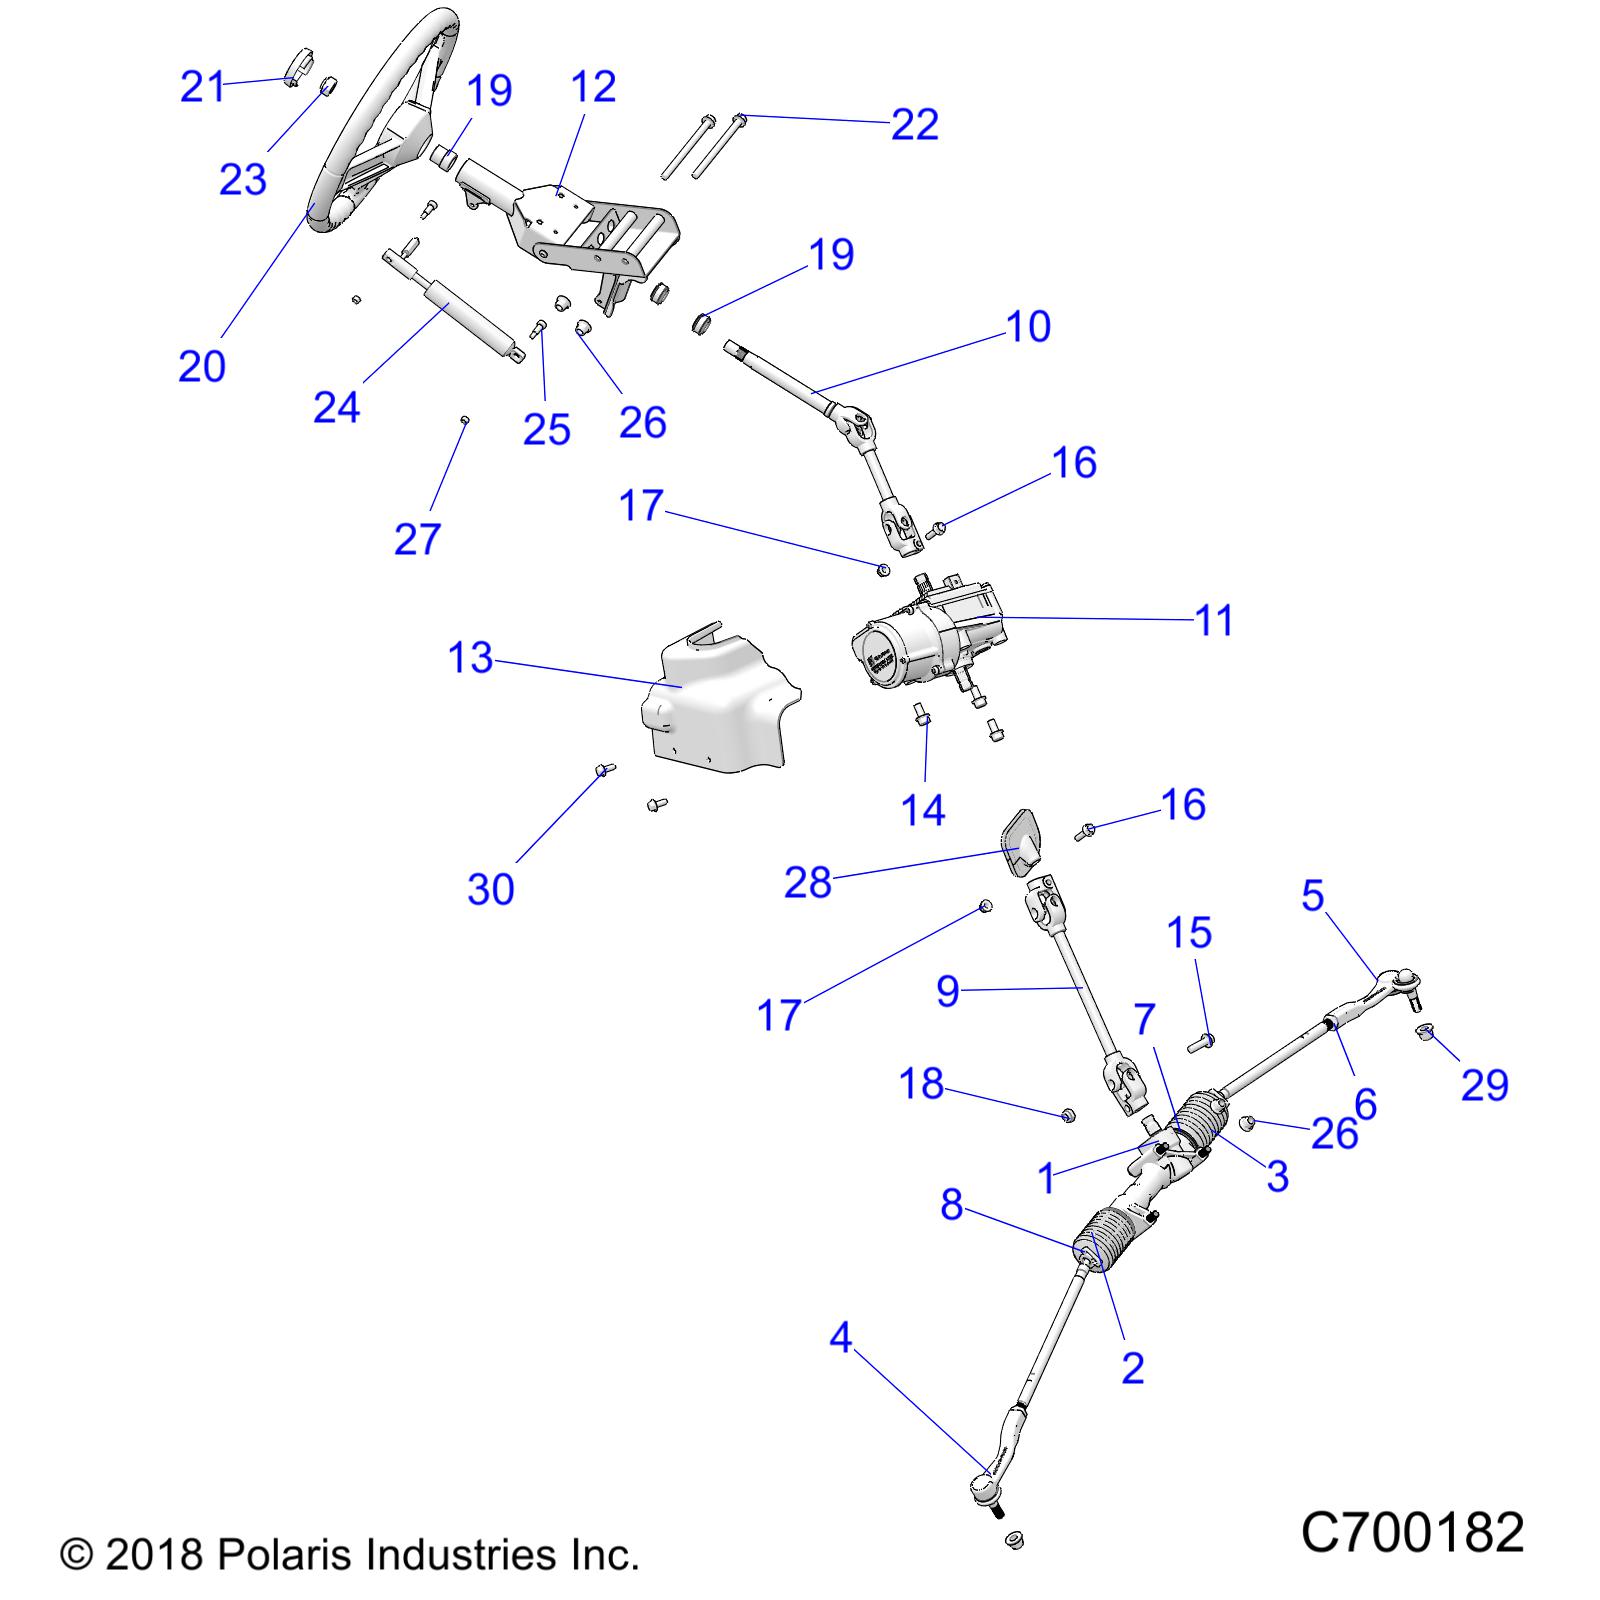 Part Number : 1824770 GEAR BOX STEERING ASSEMBLY